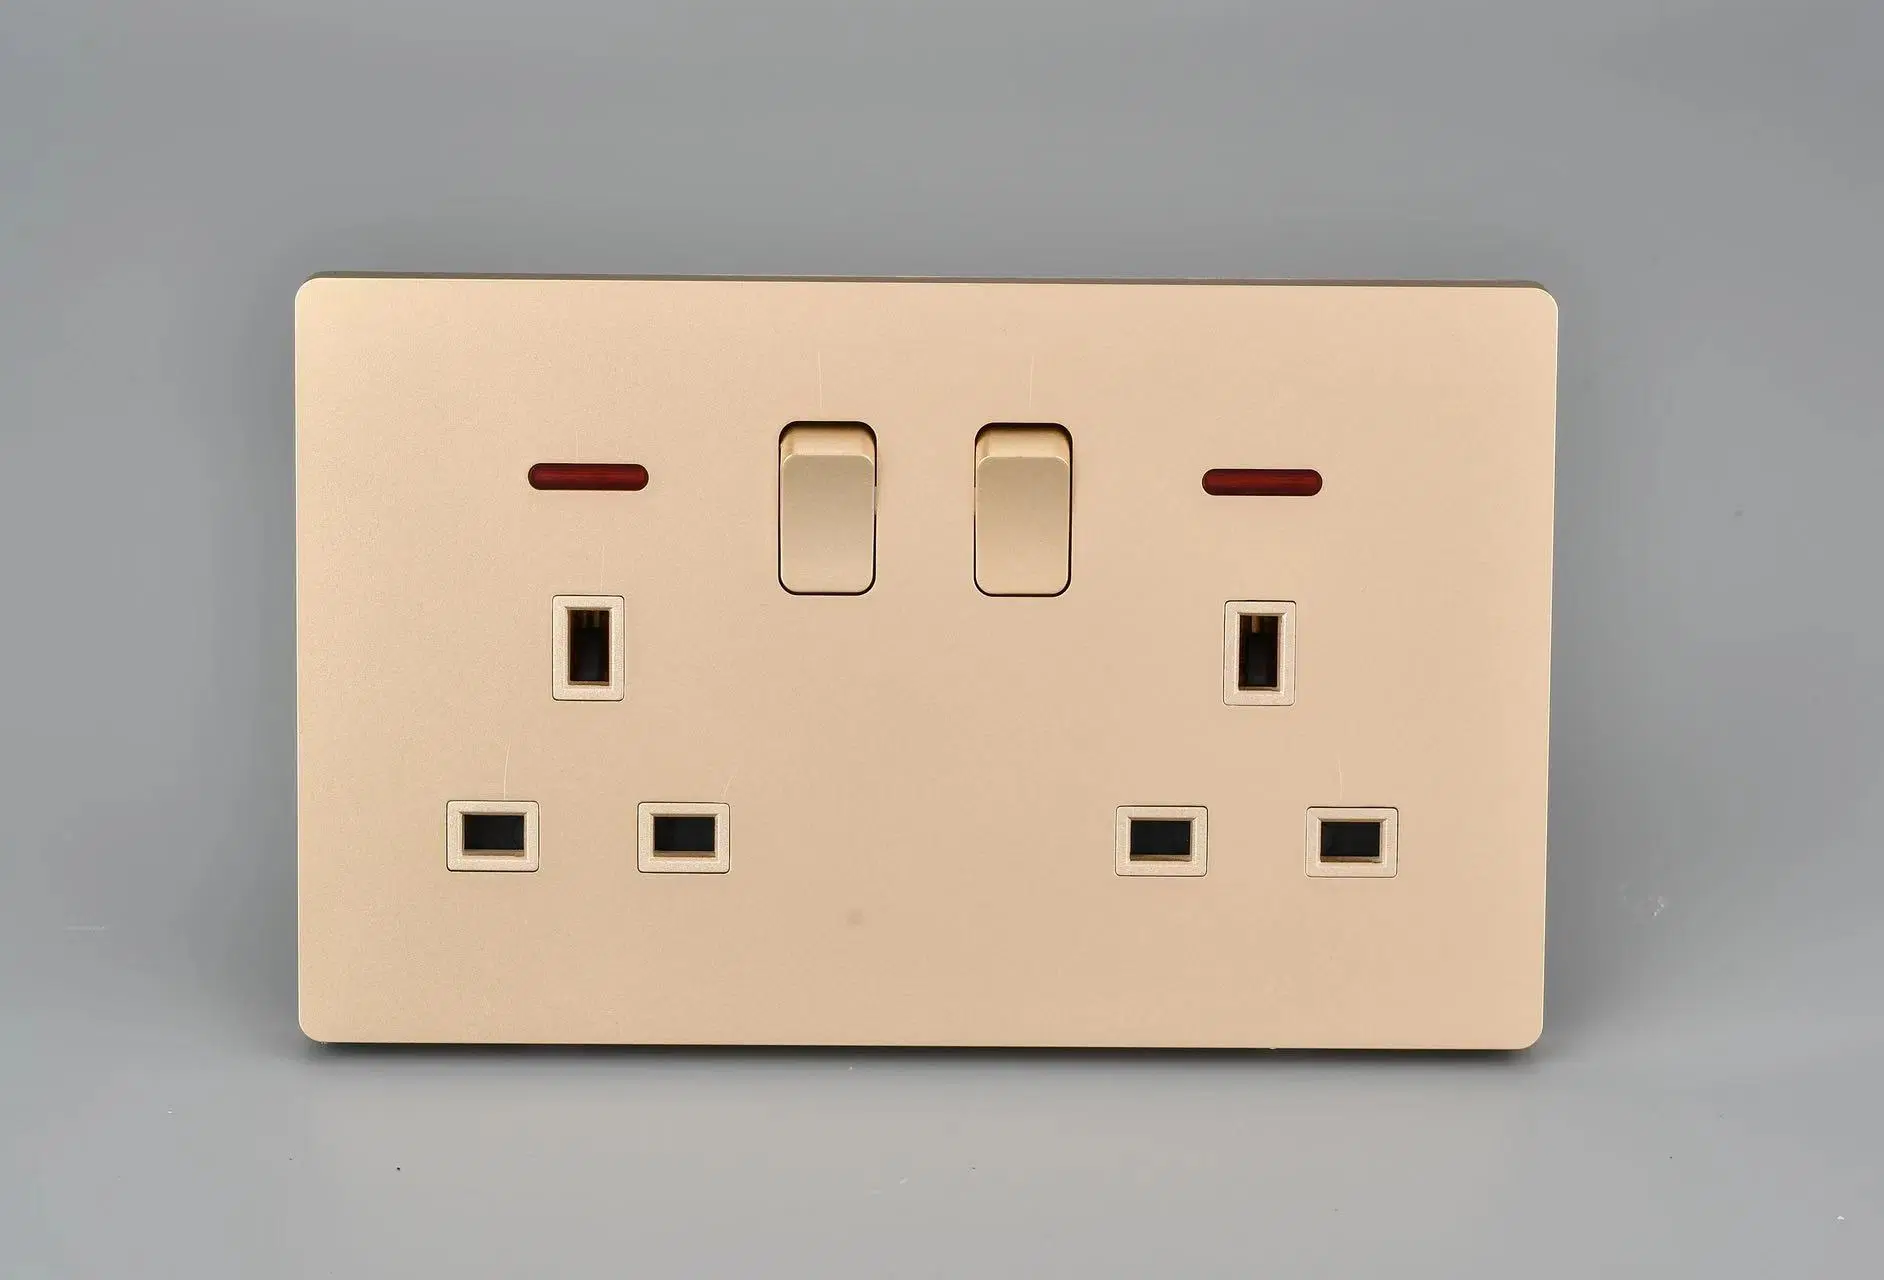 Bingoelec UL Listed 3 Way Dimmer Light Switch/Dimmer Switcheurope Model Touch Switch Home Electric Plugs Schuko Wall Socket with USB Ports